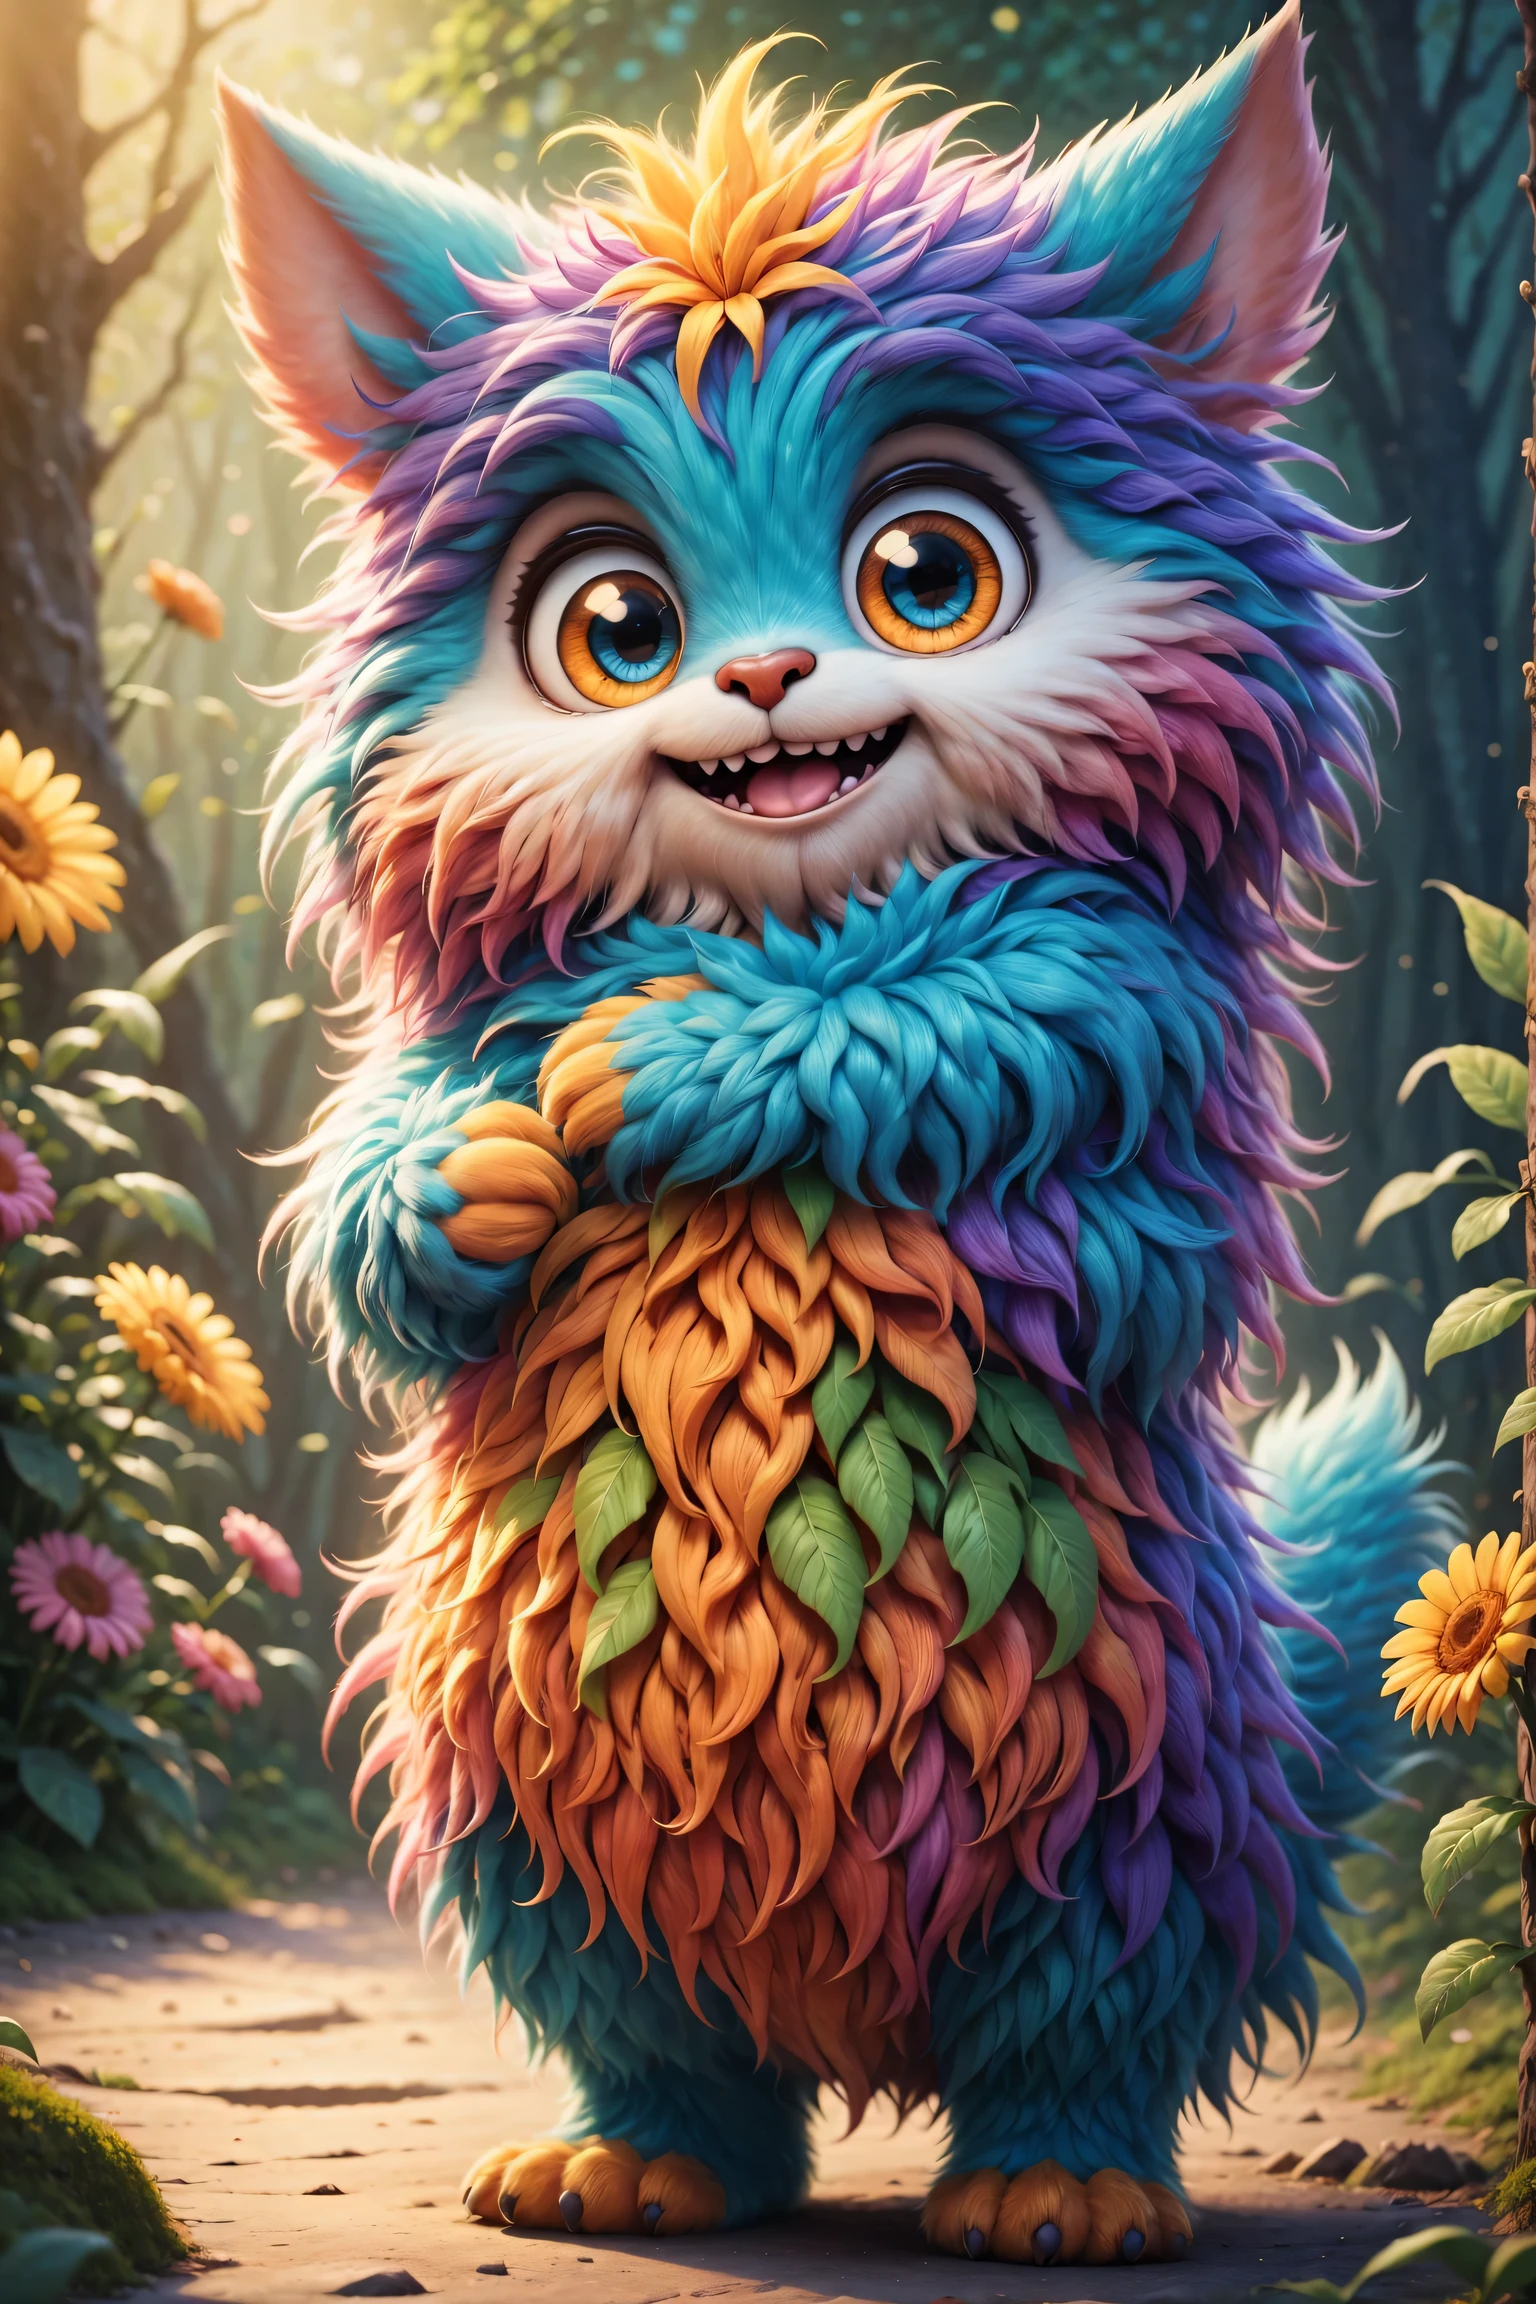 （best quality），Super fine，lifelike，3d rendering，Cute furry monster，cute eyes，cartoonish style，colorful fur，mischievous expression，Soft texture，Fantasy creatures，Bright and vibrant colors，warm light，